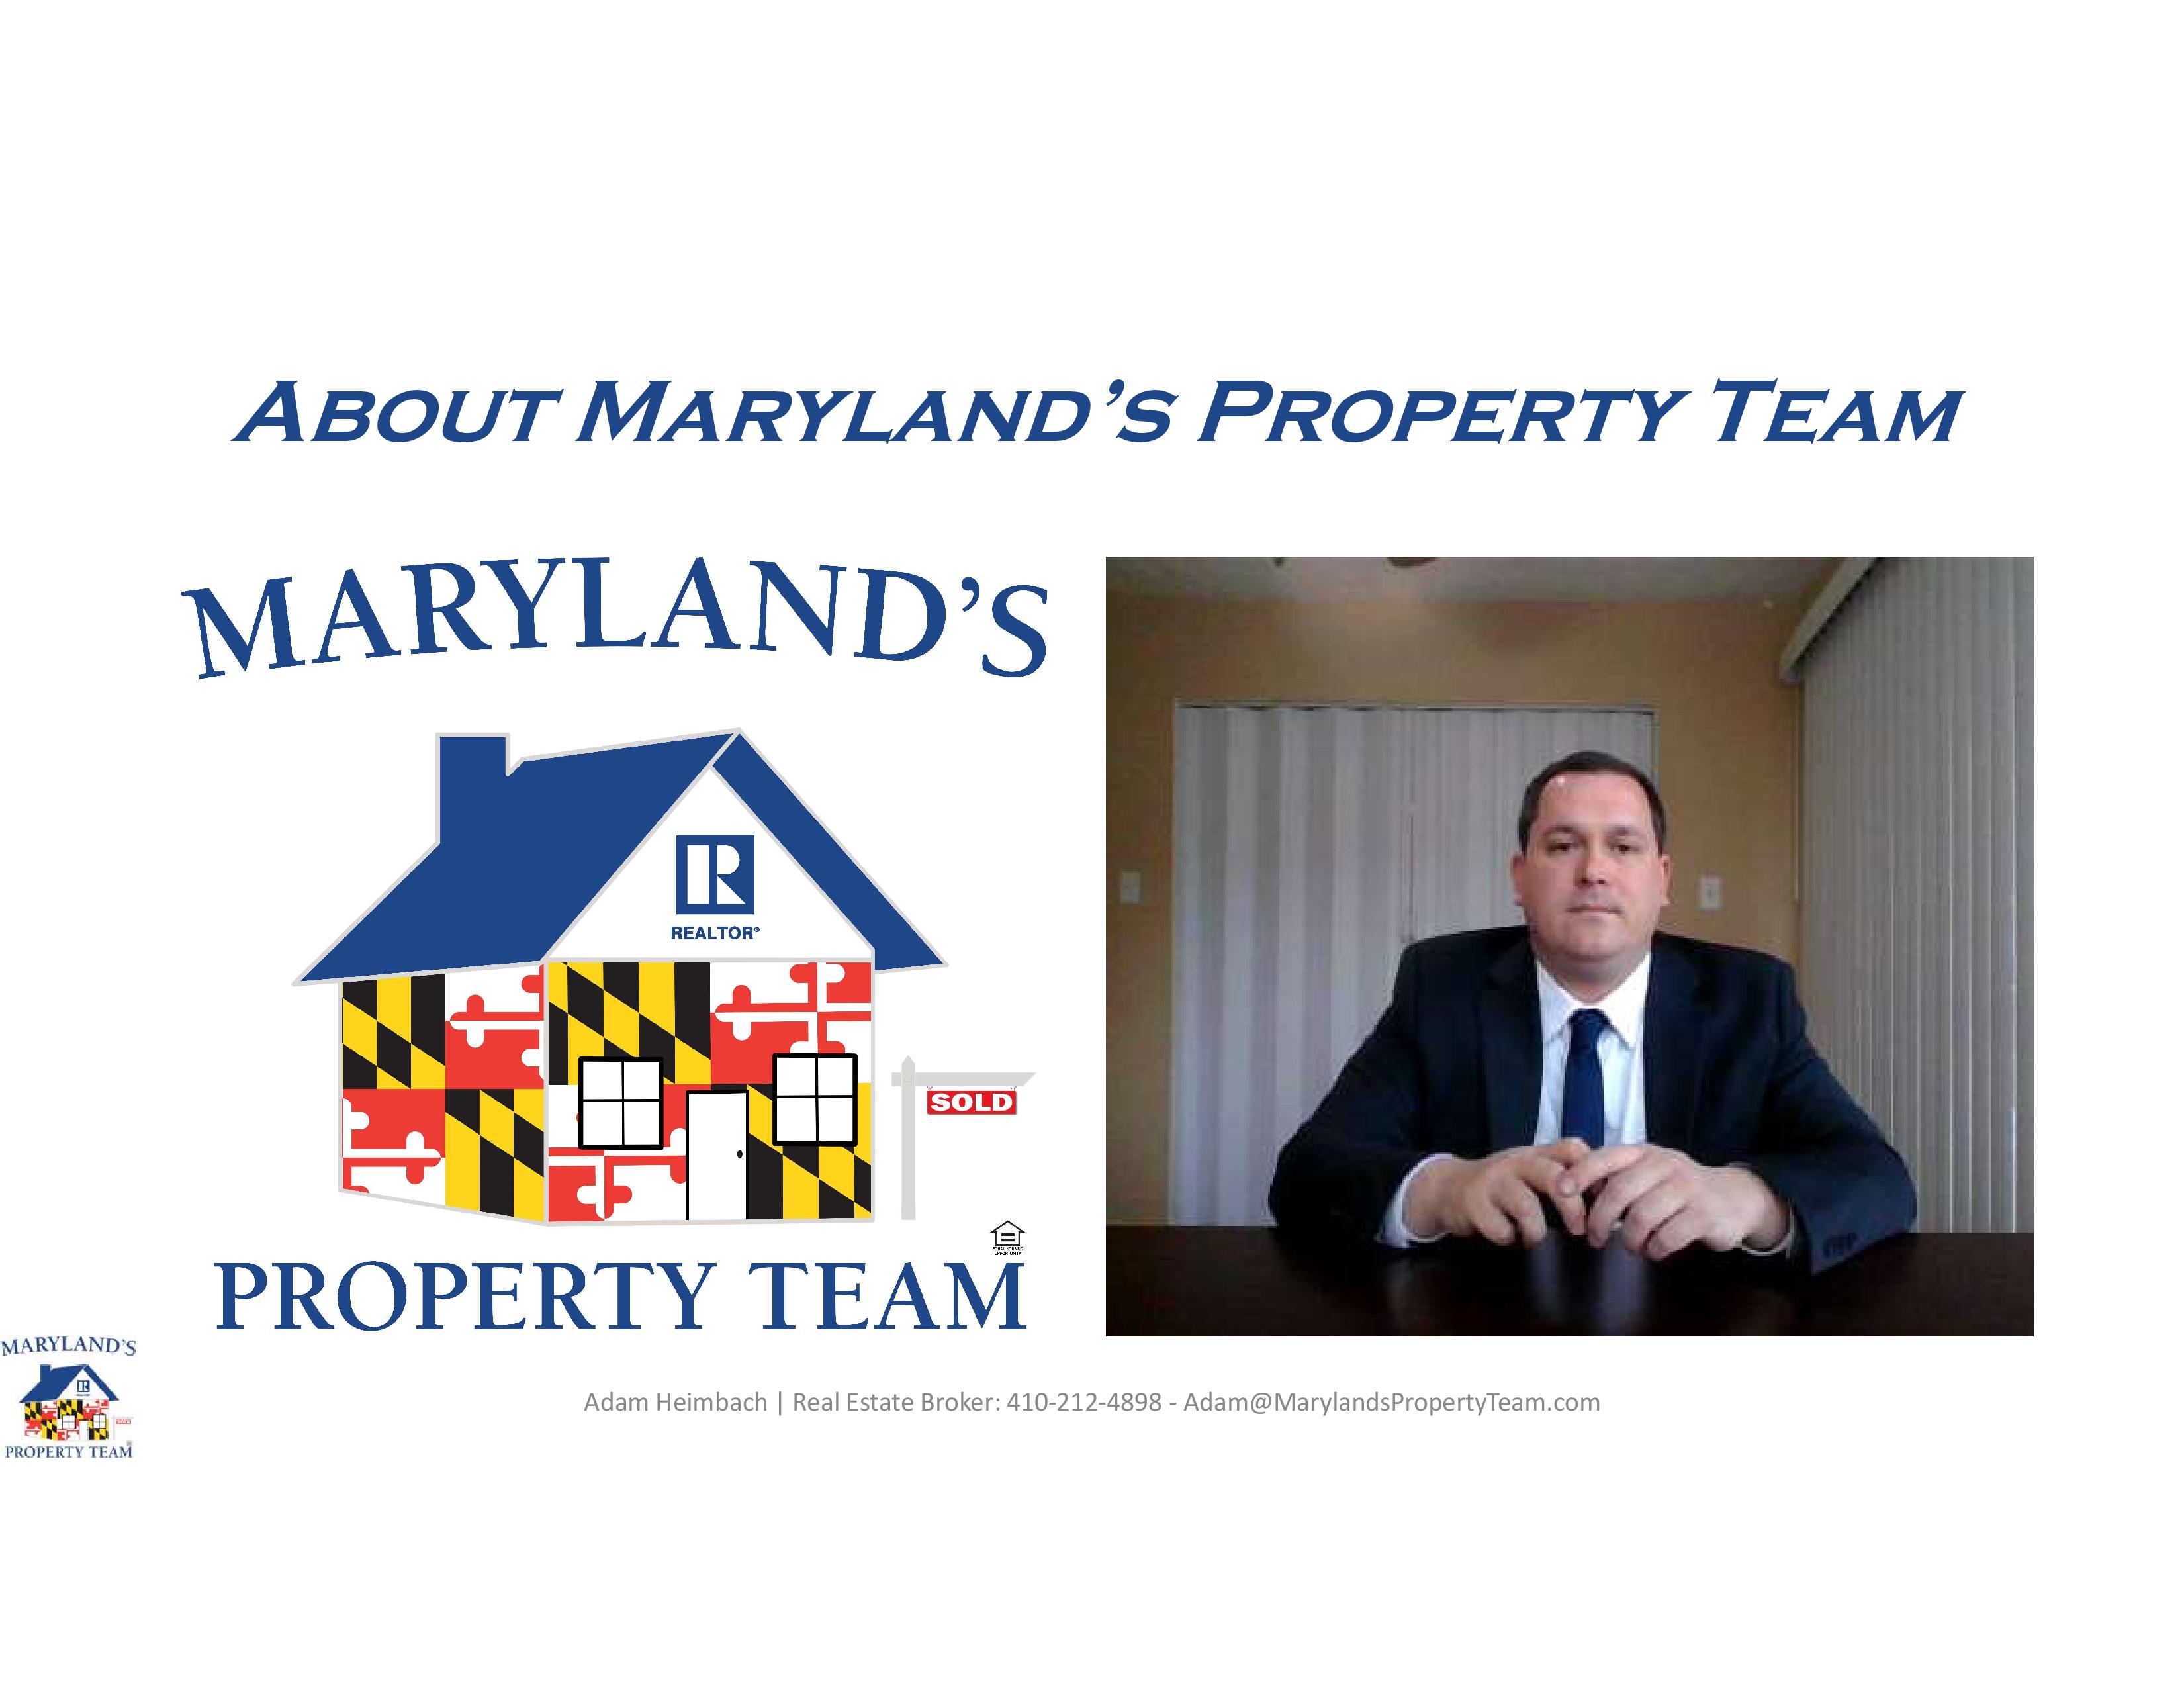 About Maryland’s Property Team